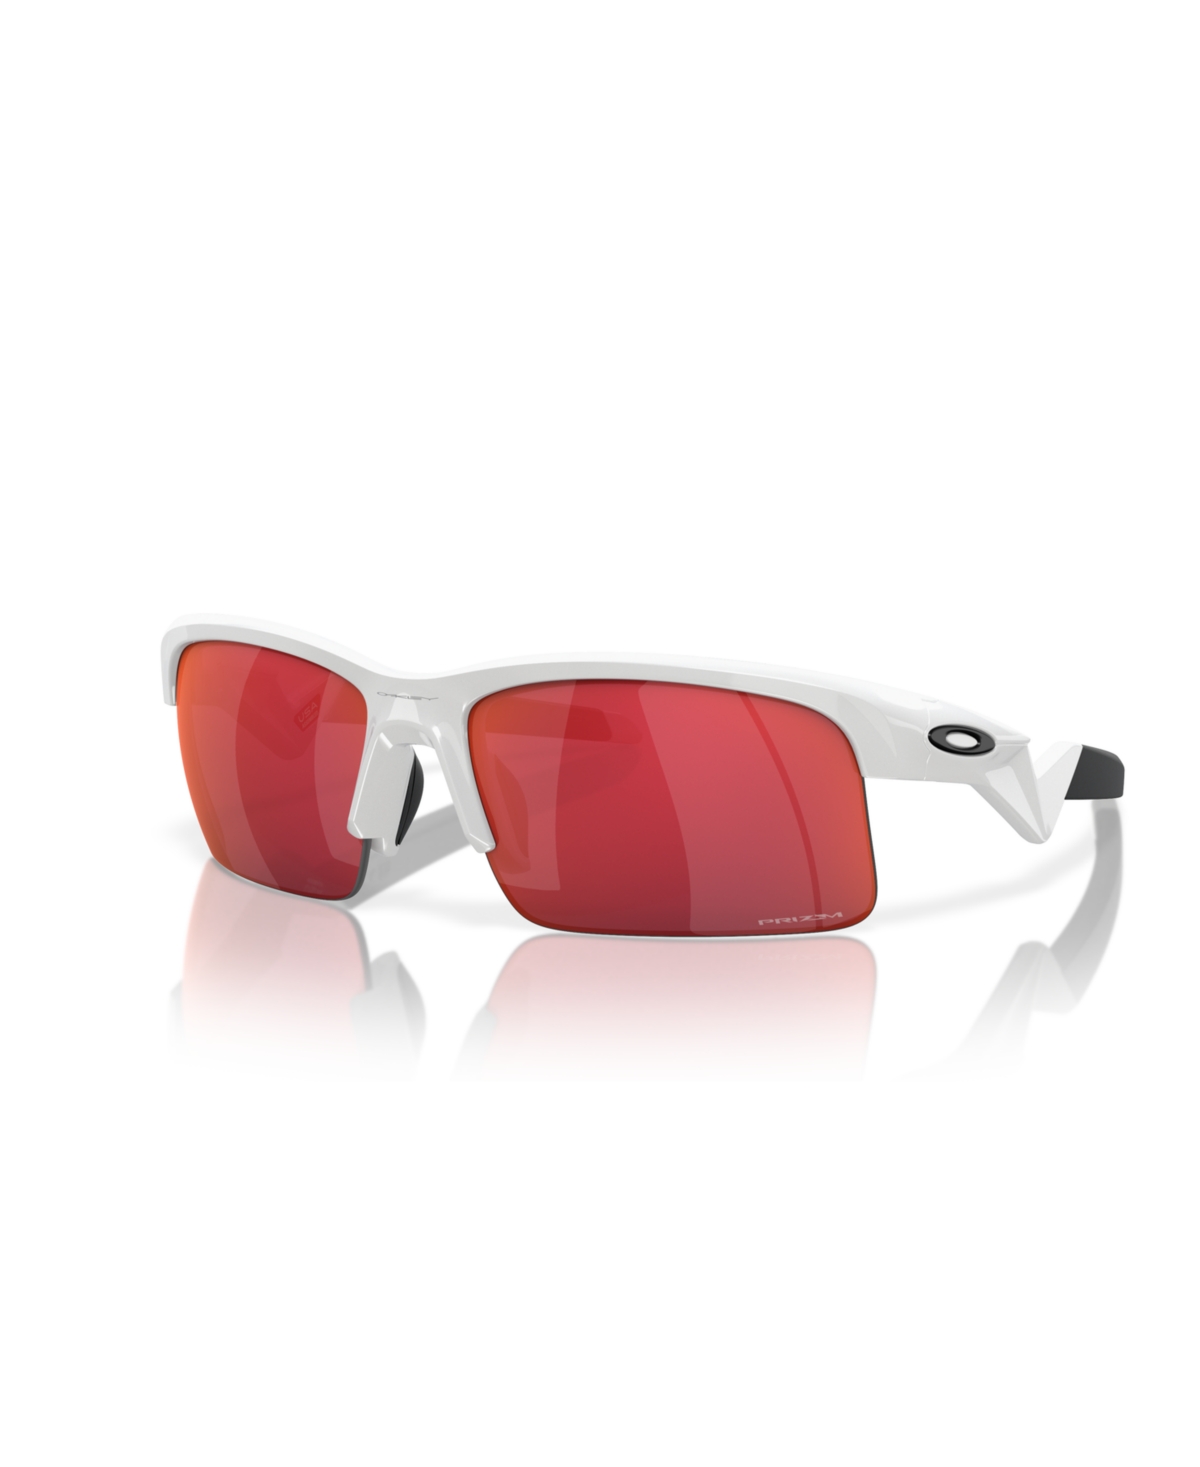 Kid's Sunglasses, Capacitor Youth Fit Oj9013 - Polished White, Red